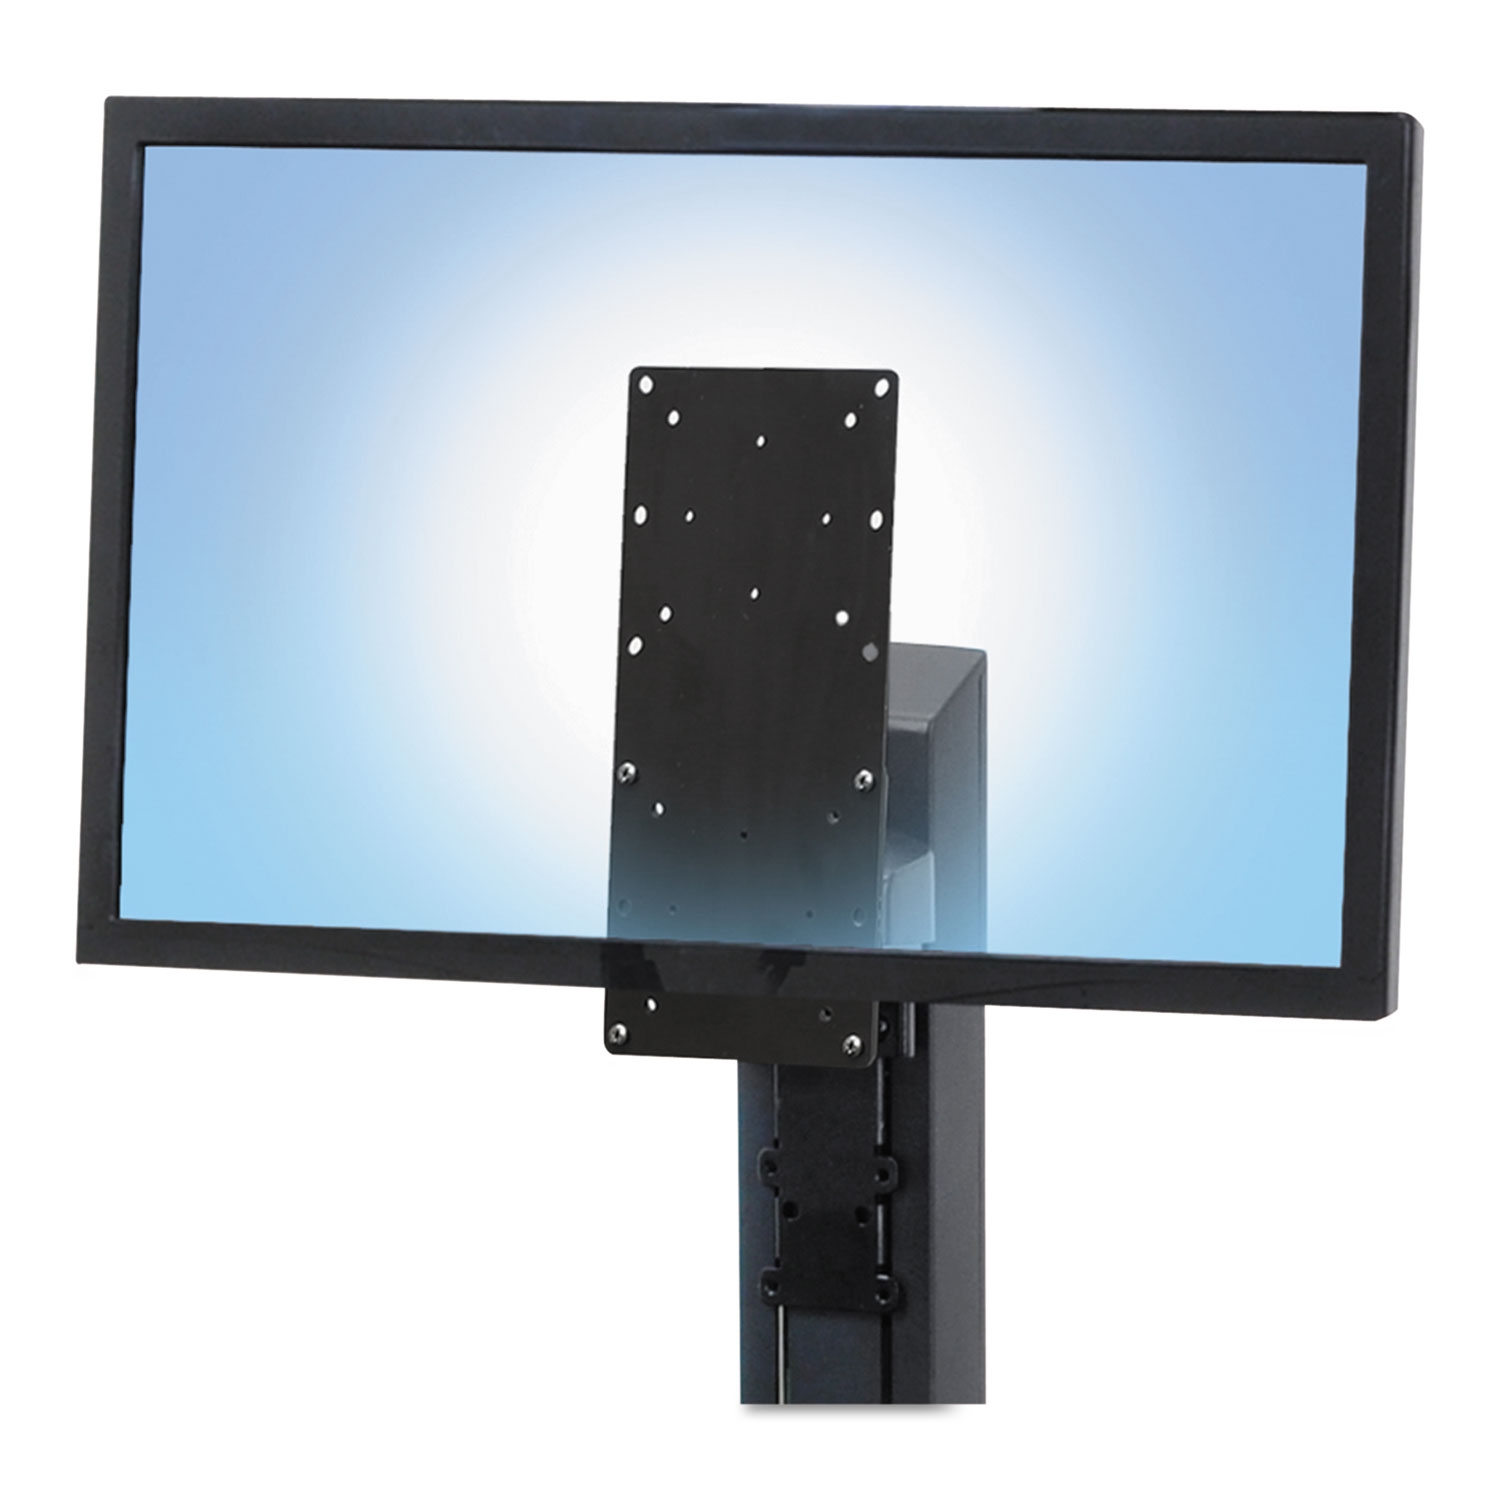  WorkFit by Ergotron 97-845 Tall-User Kit for WorkFit-A/S Single Display Workstations, Black (ERG97845) 